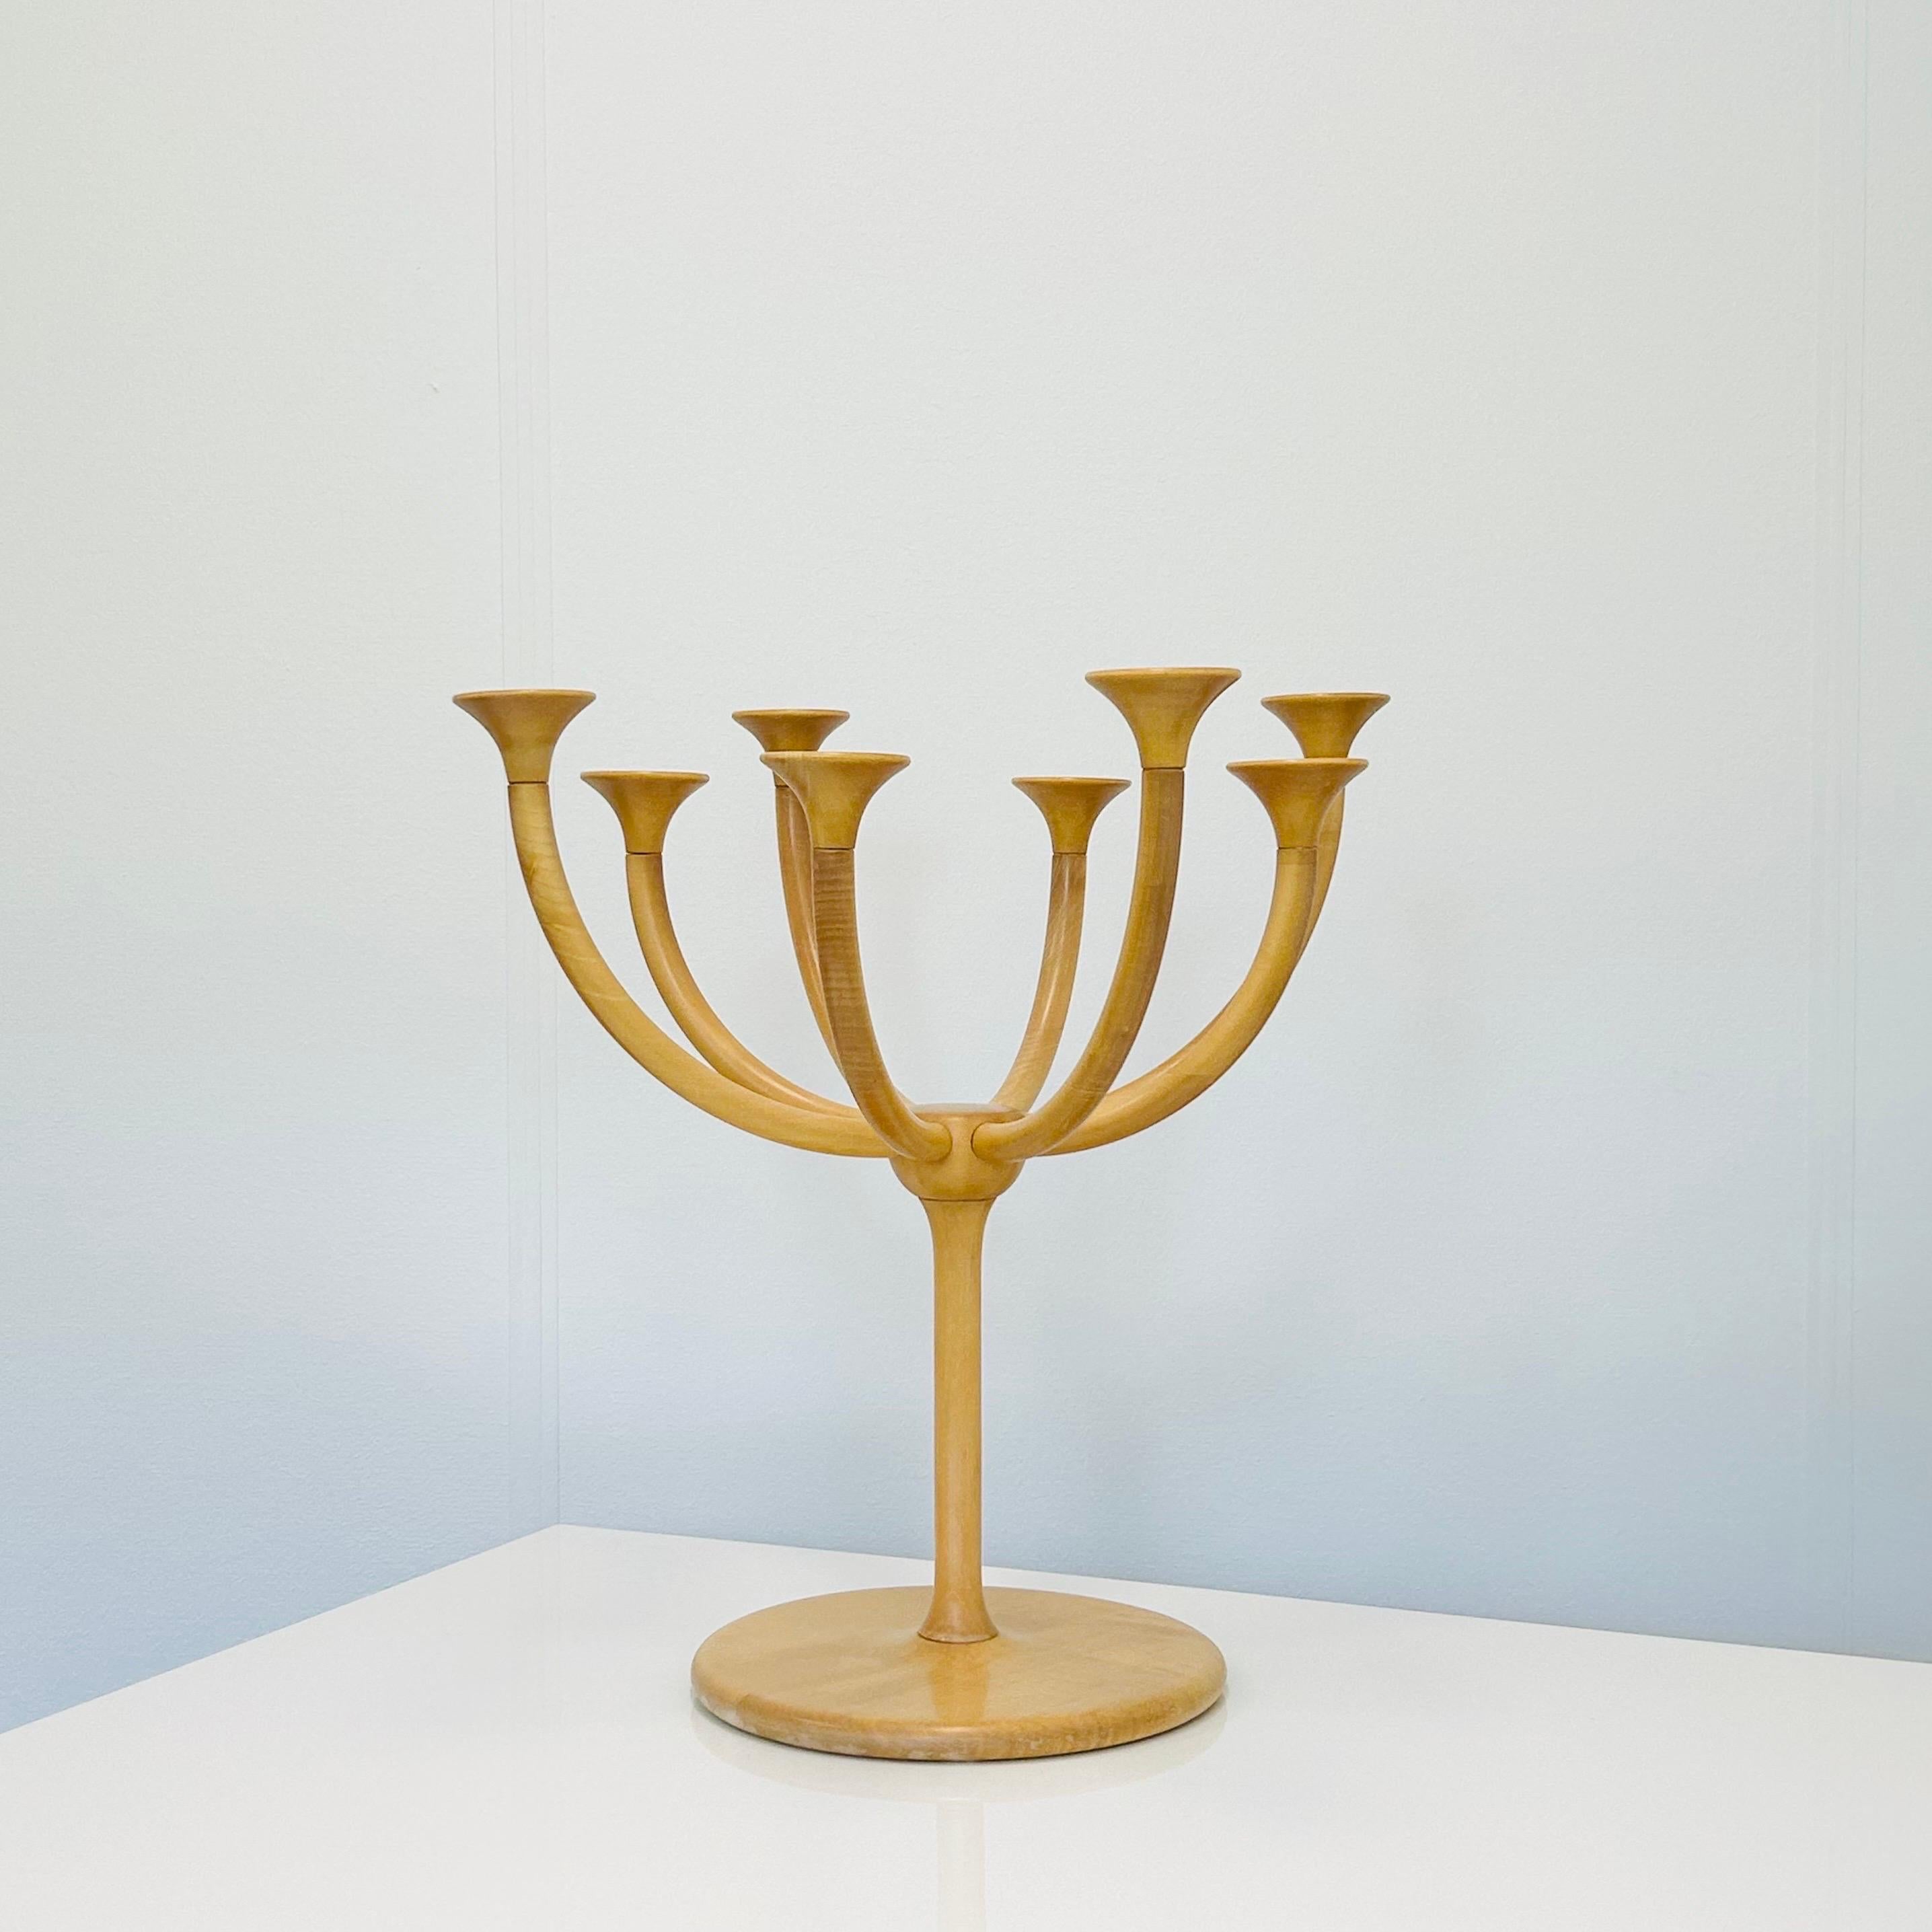 An impressive and captivating floor-size candelabrum in bent maple designed by Nanna Ditzel. Crafted from the finest bent maple wood this remarkable 8-candle piece will instantly command attention and fit into any modern setting.

* A candelabrum